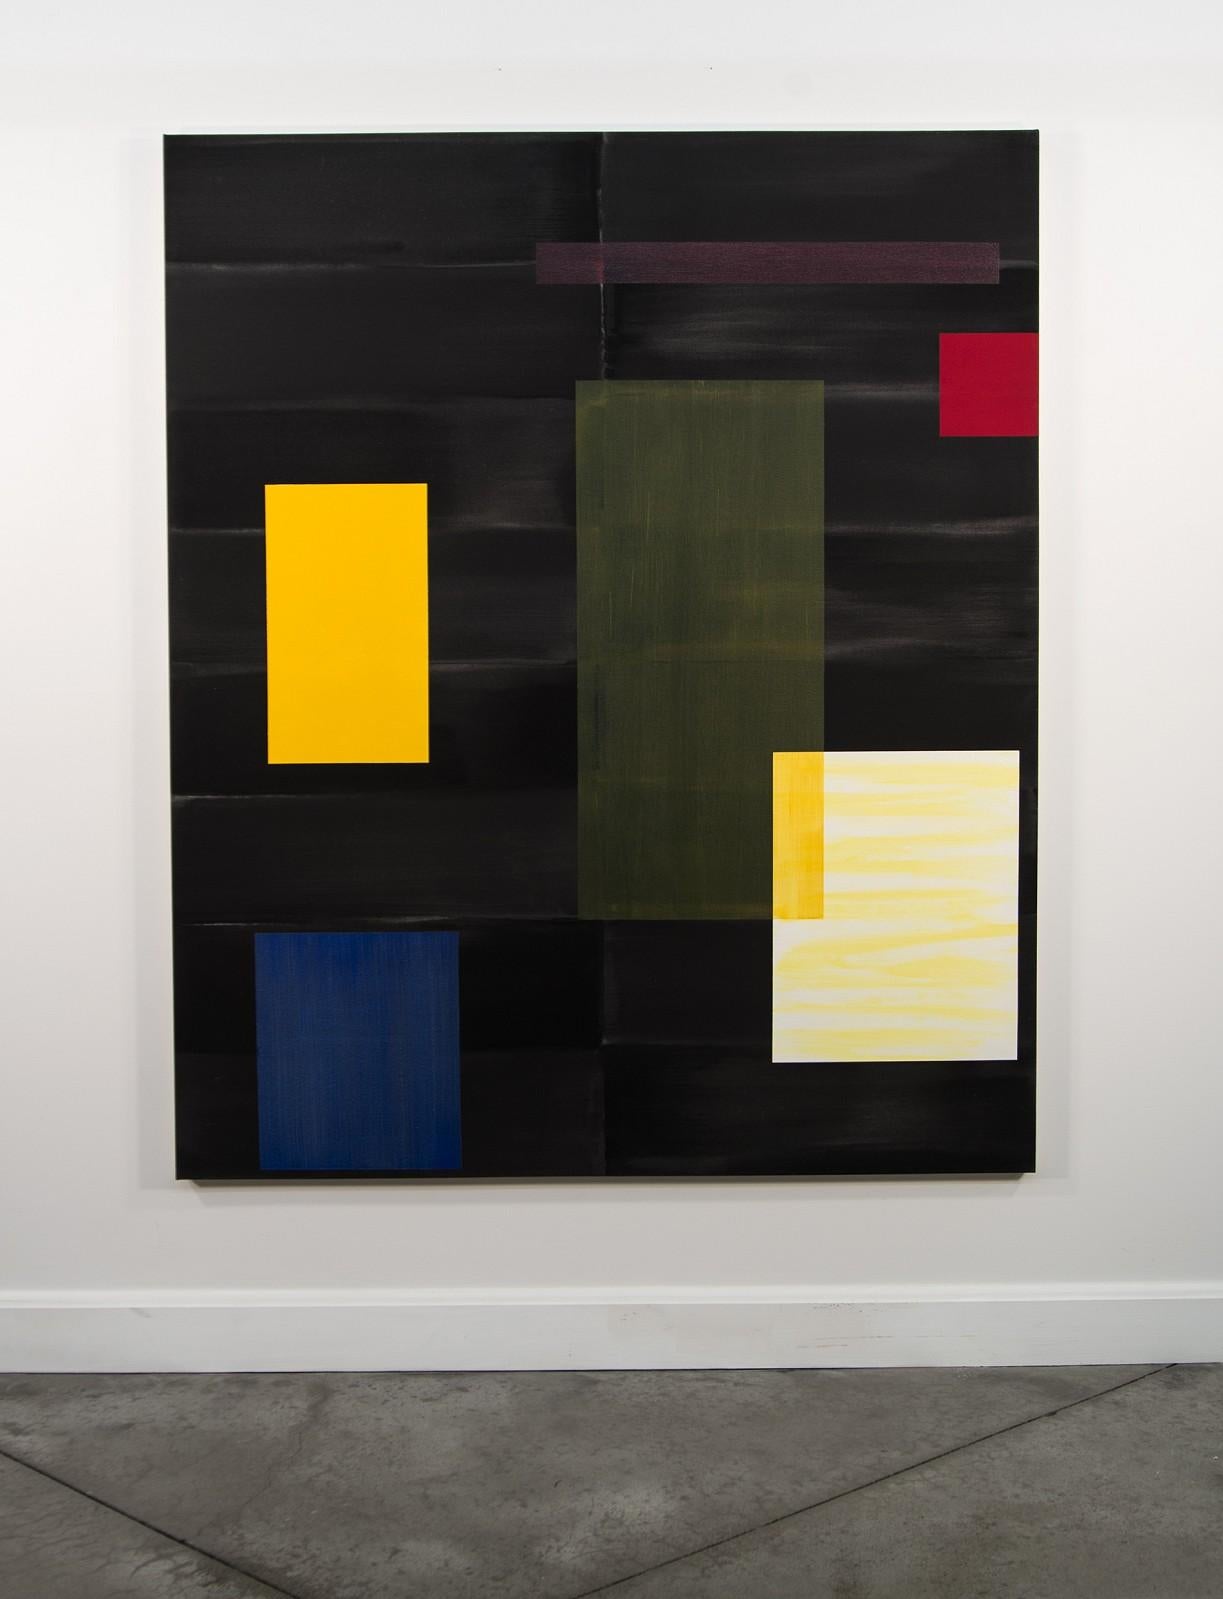 A narrative of hard edged orthogonal shapes in sapphire blue, bright yellow and crimson unfolds across a background grid of washed charcoal black rectangles. The black ground is made more powerful by the size of the six foot tall canvas and yet is